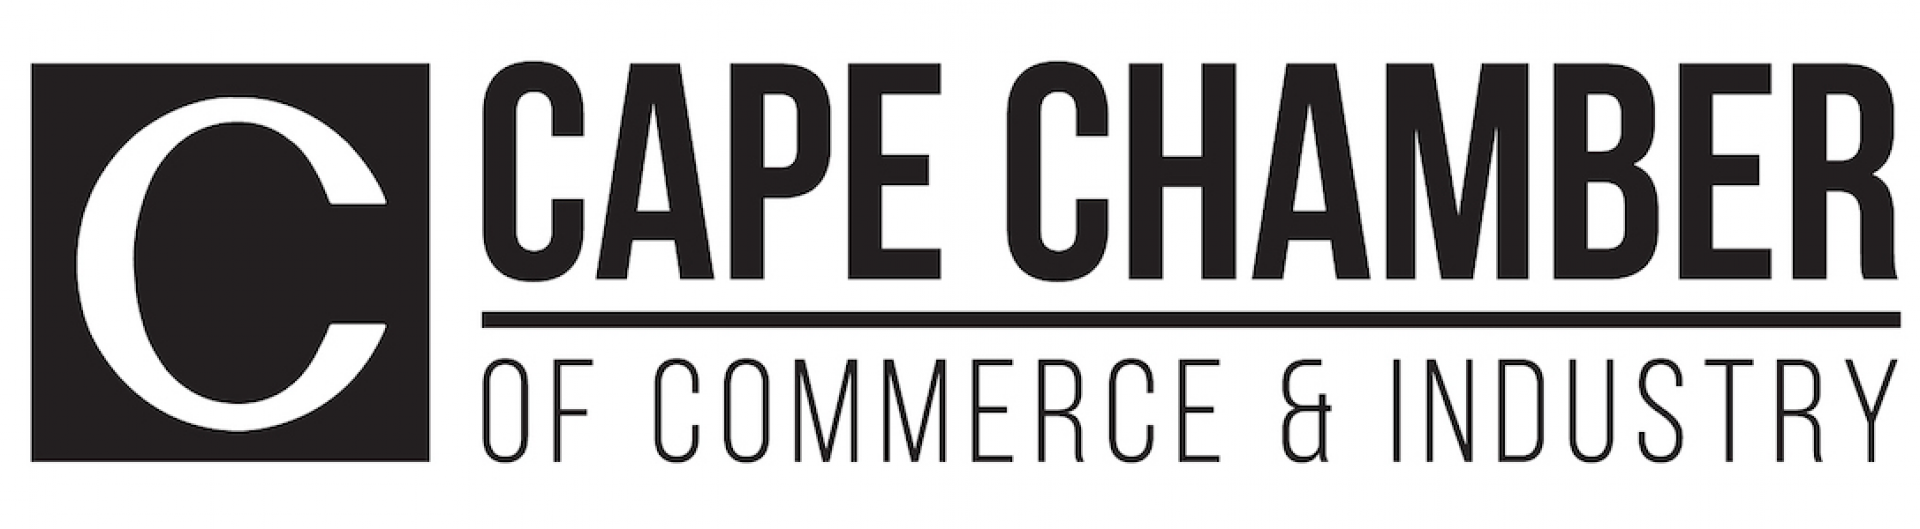 Cape Chamber: How the Oldest Chamber in Africa Stays Relevant with Glue Up